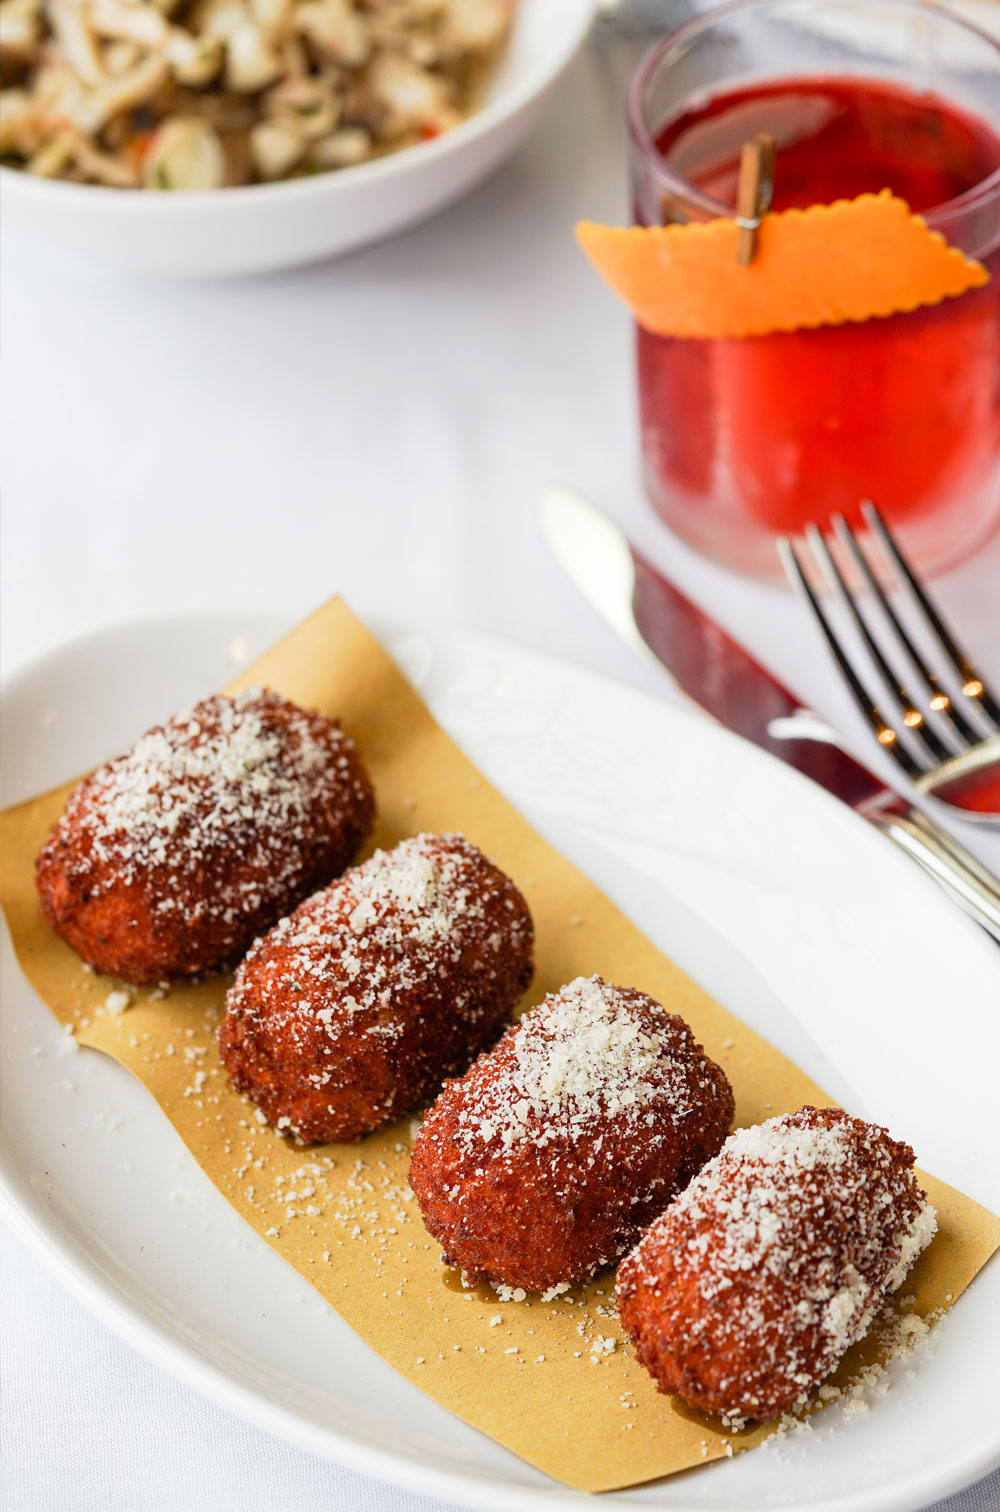 4 polpette lined on a plate next to a negroni